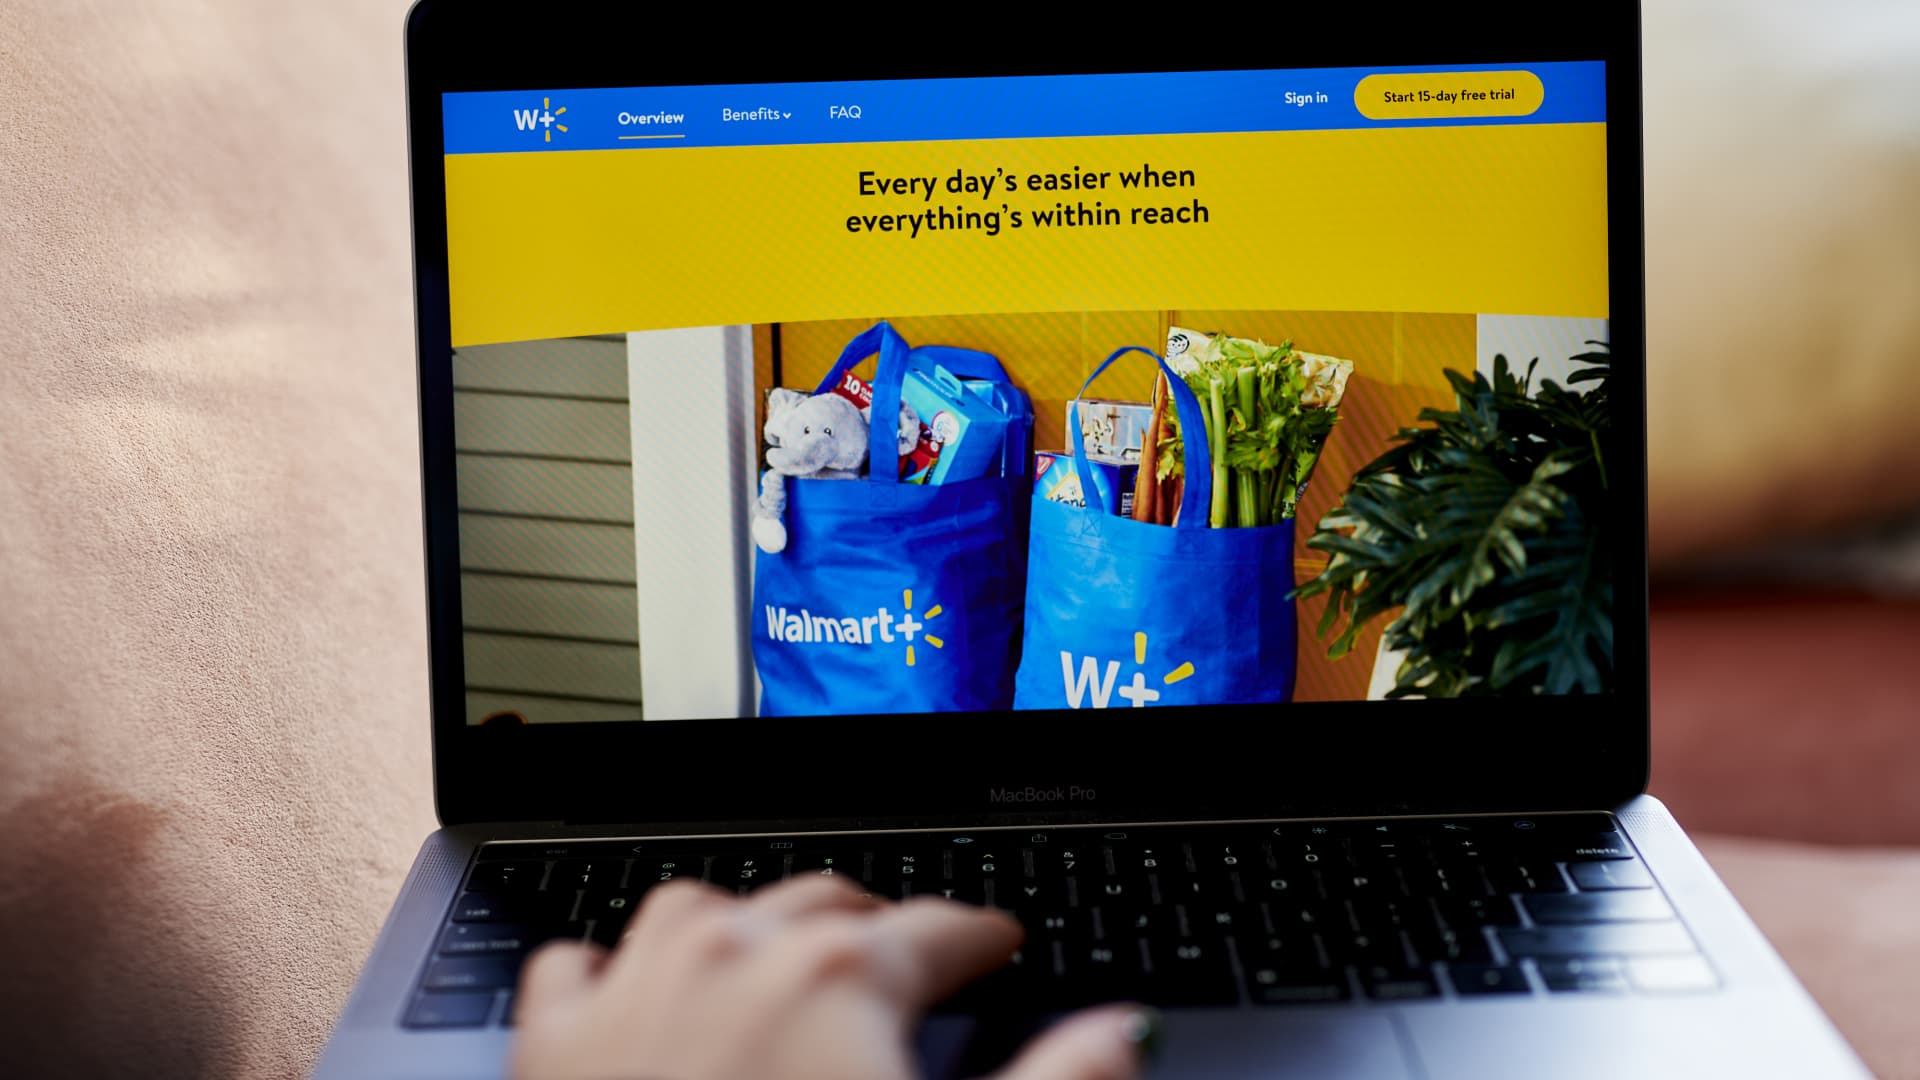 Walmart dangles deeper gas discounts to attract and retain members of subscription service - CNBC